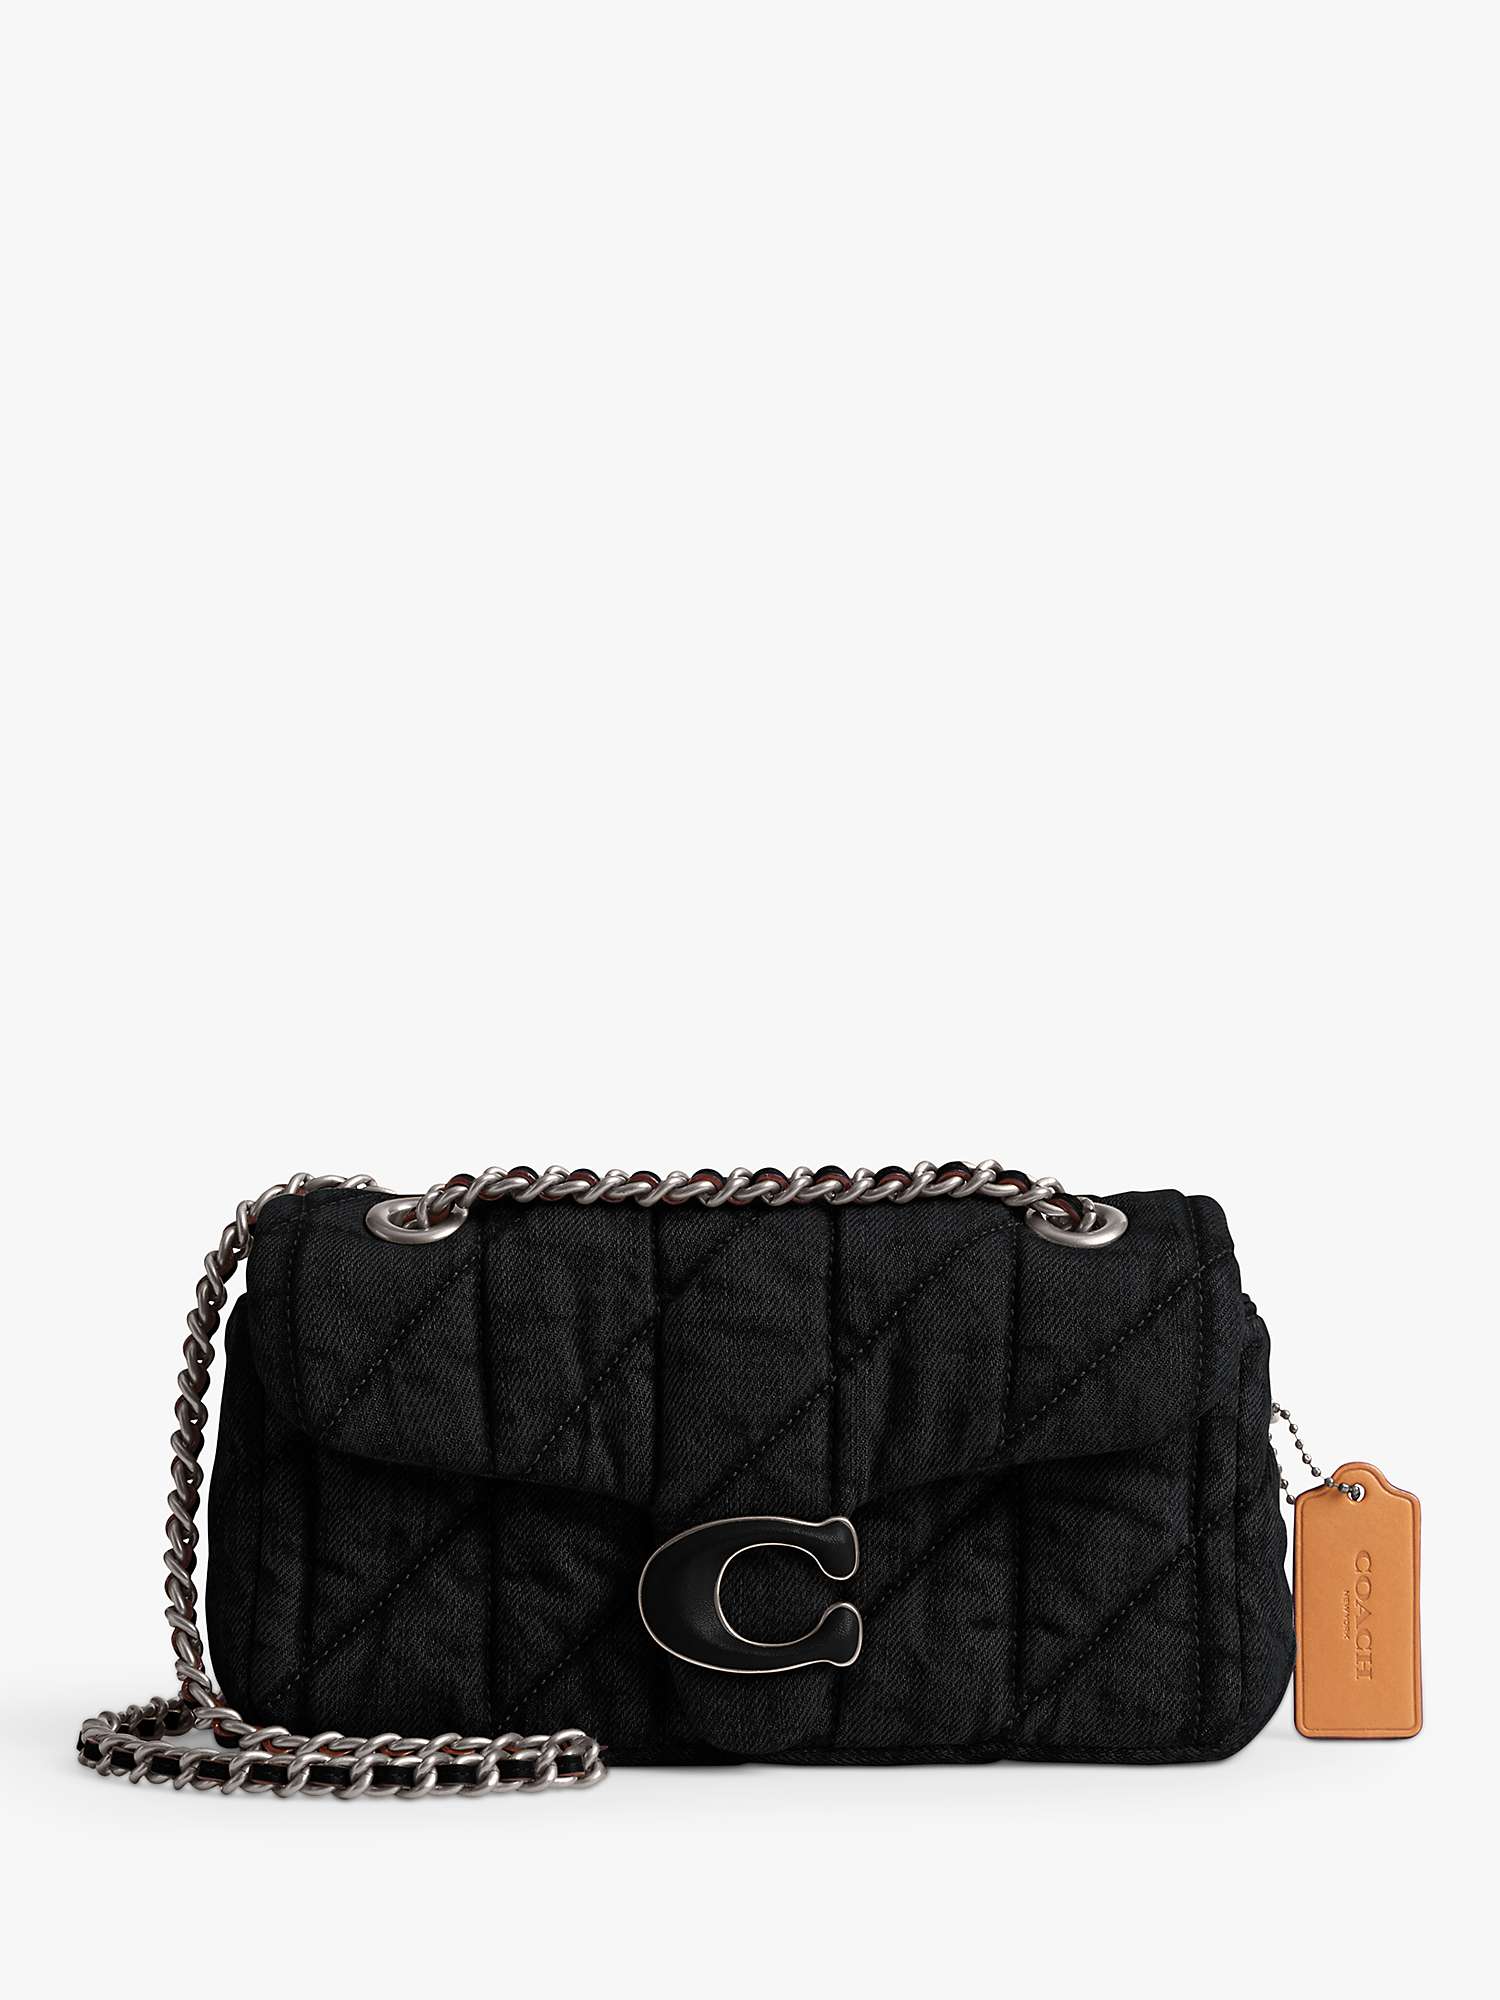 Buy Coach Tabby 20 Quilted Denim Cross Body Bag Online at johnlewis.com